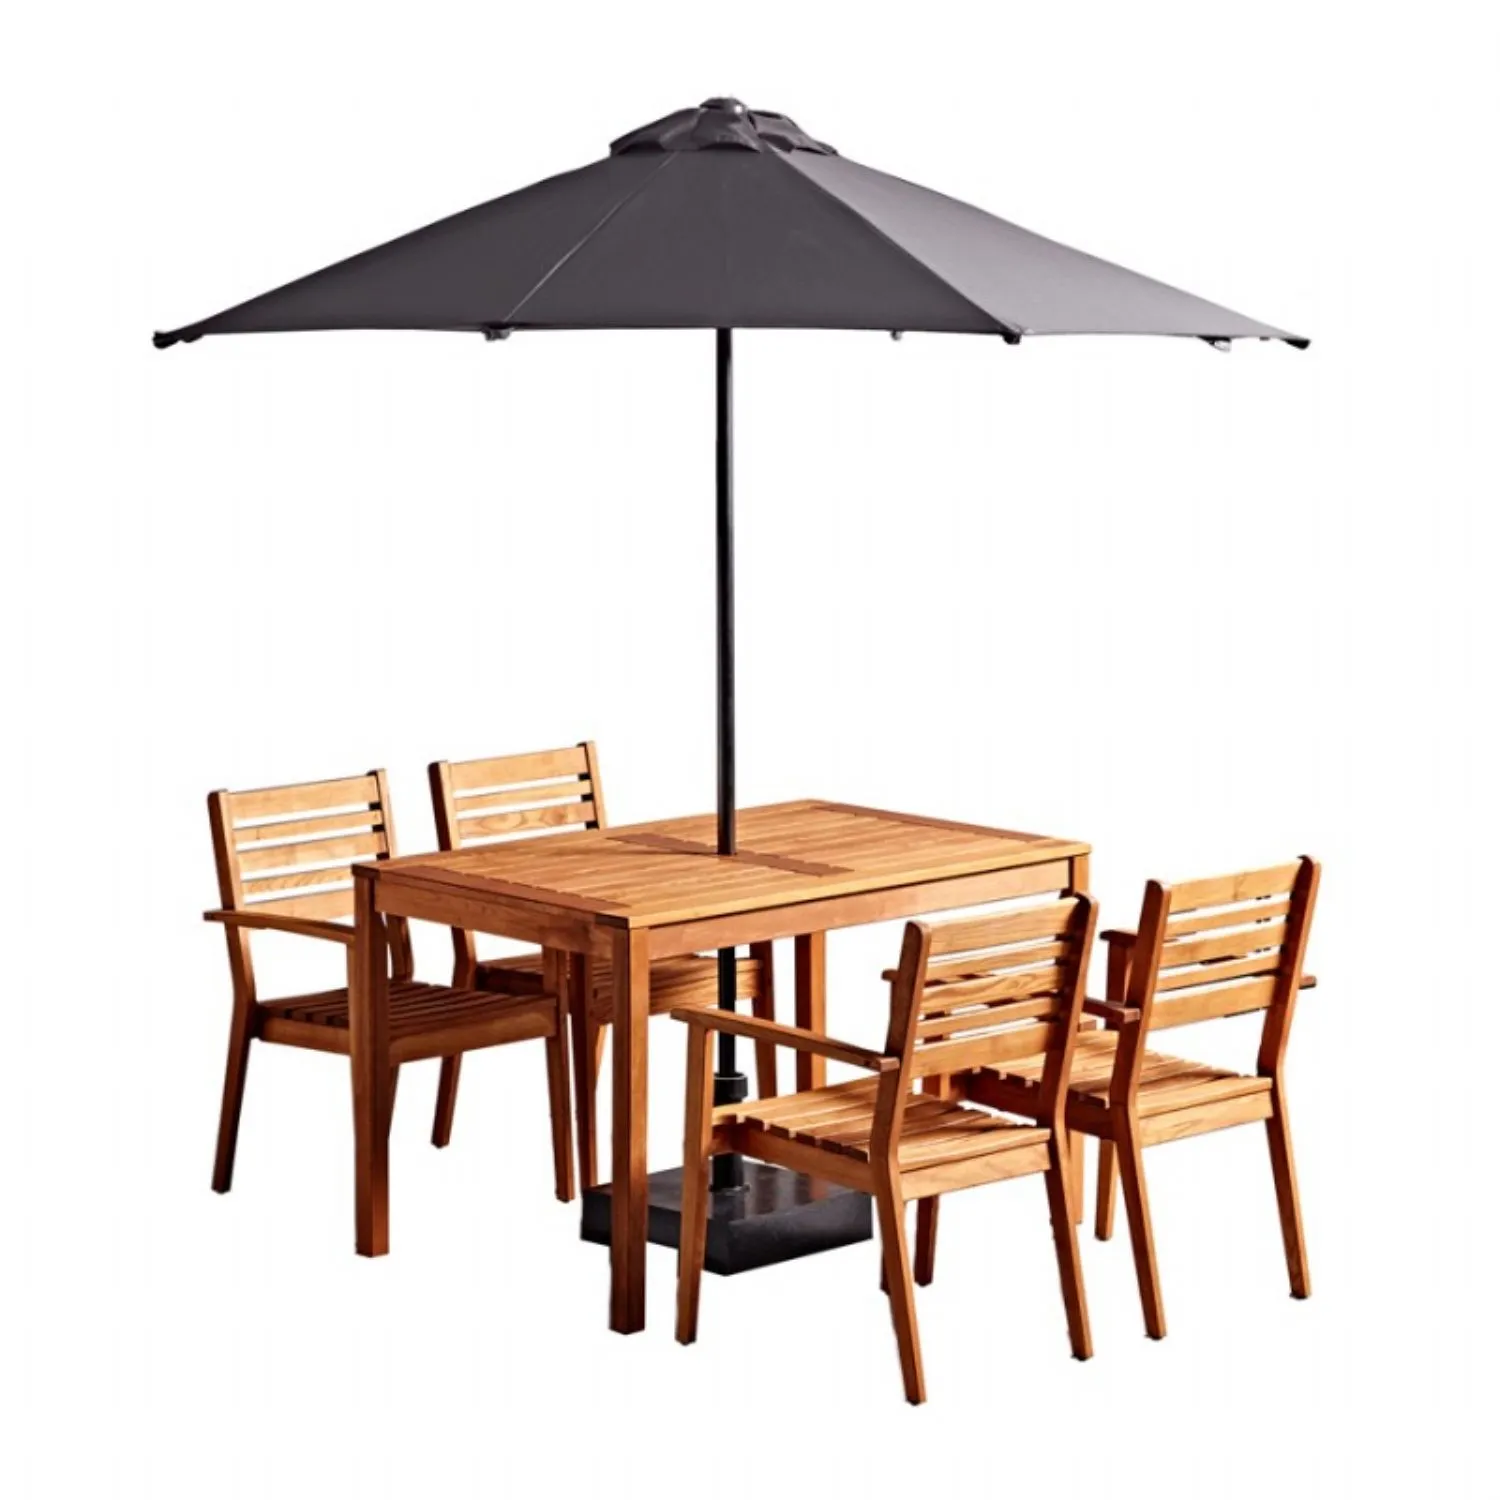 Traditional Wooden Garden Table and 4 Chair Set With Parasol